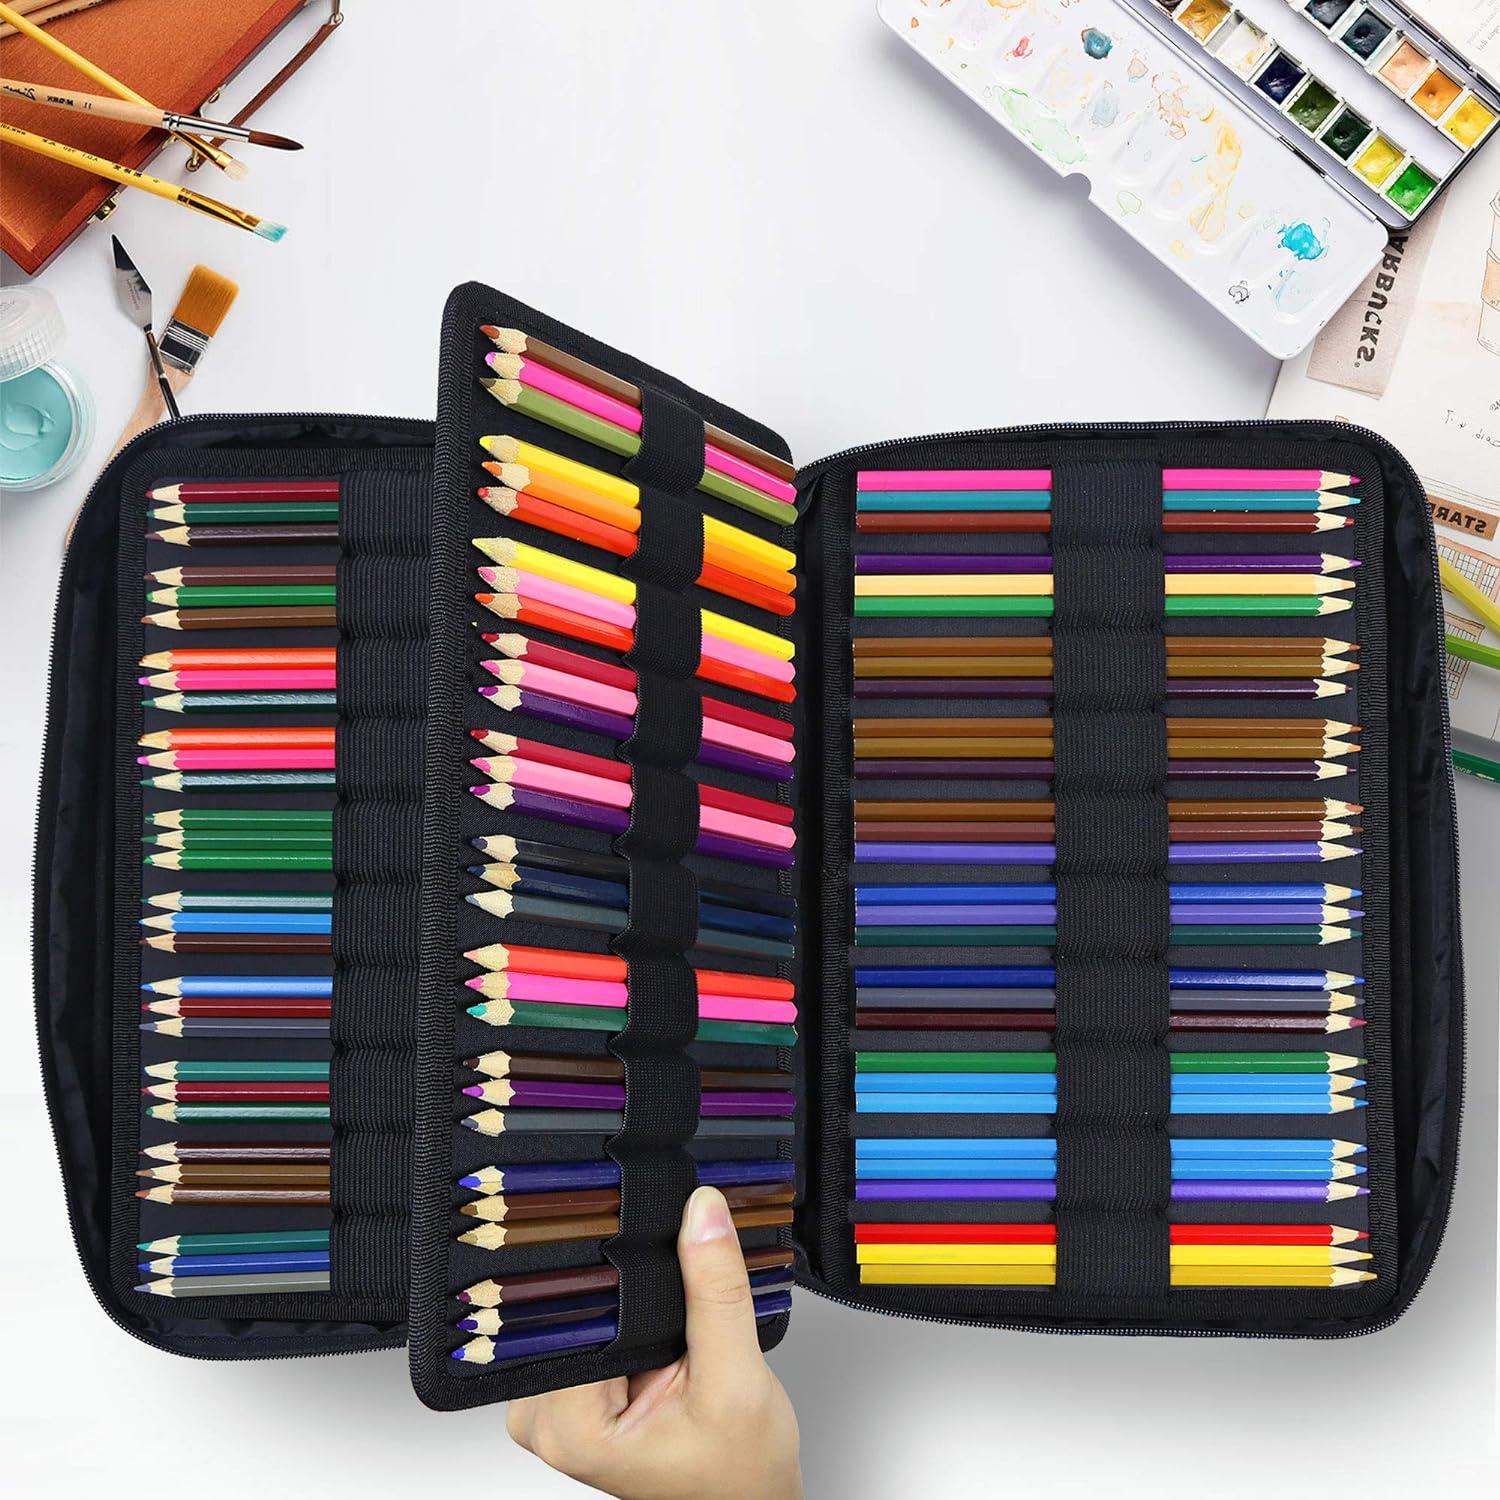 YOUSHARES Big Capacity Colored Pencil Case - 220 Slots Large Pen Case  Organizer With Multilayer Holder For Prismacolor Colored Pencils & Gel Pen  (Constellation Geometry)